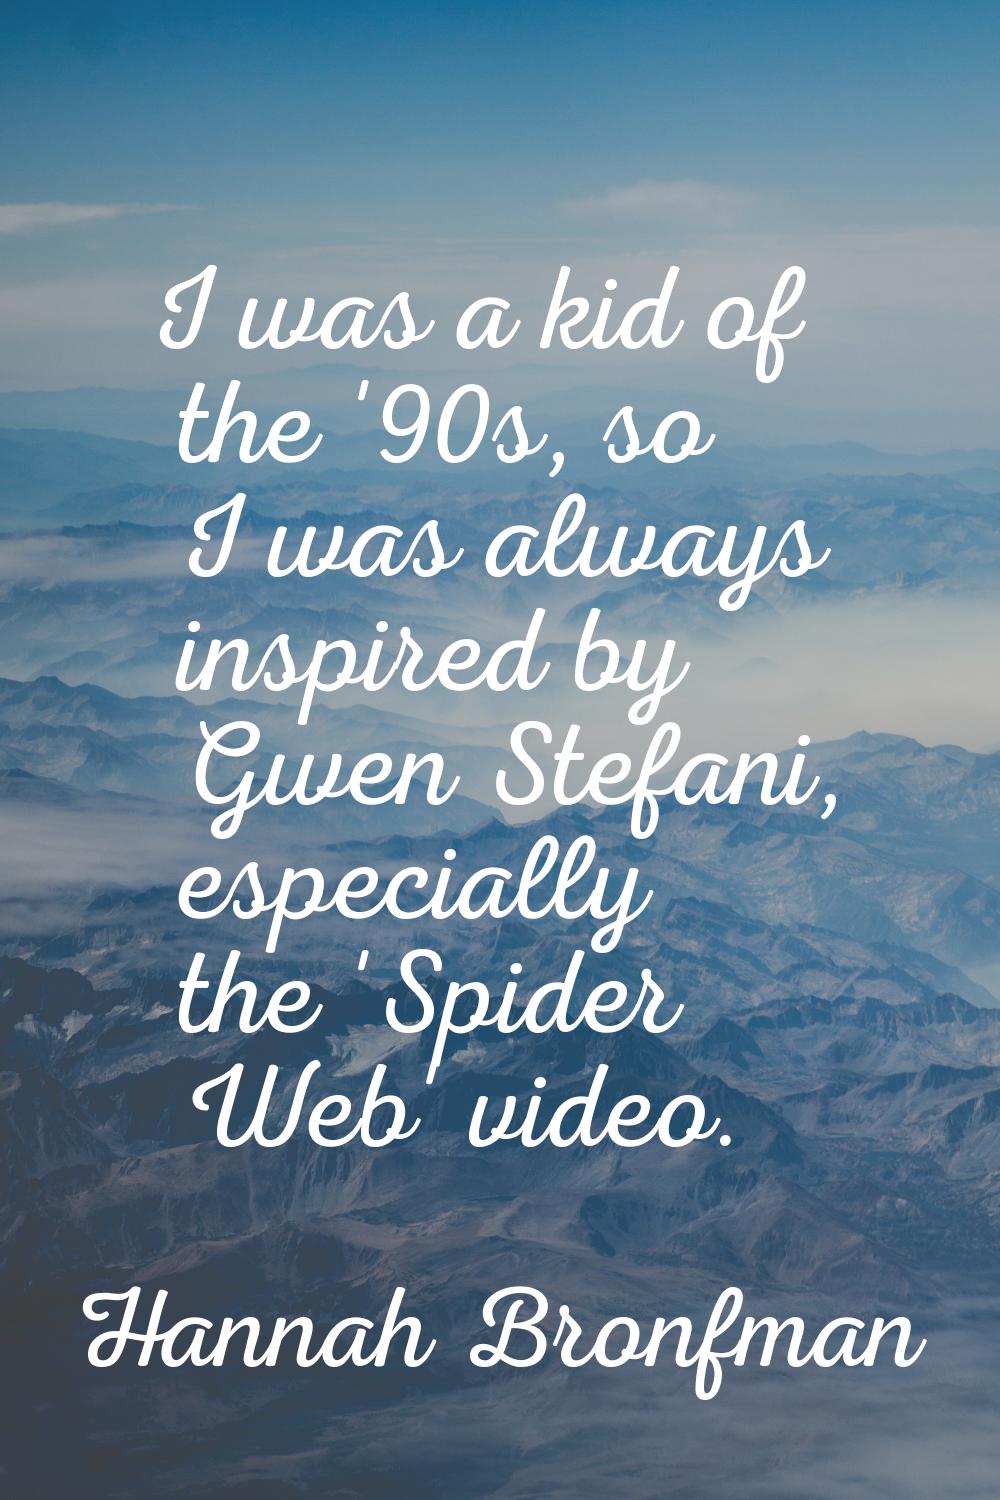 I was a kid of the '90s, so I was always inspired by Gwen Stefani, especially the 'Spider Web' vide